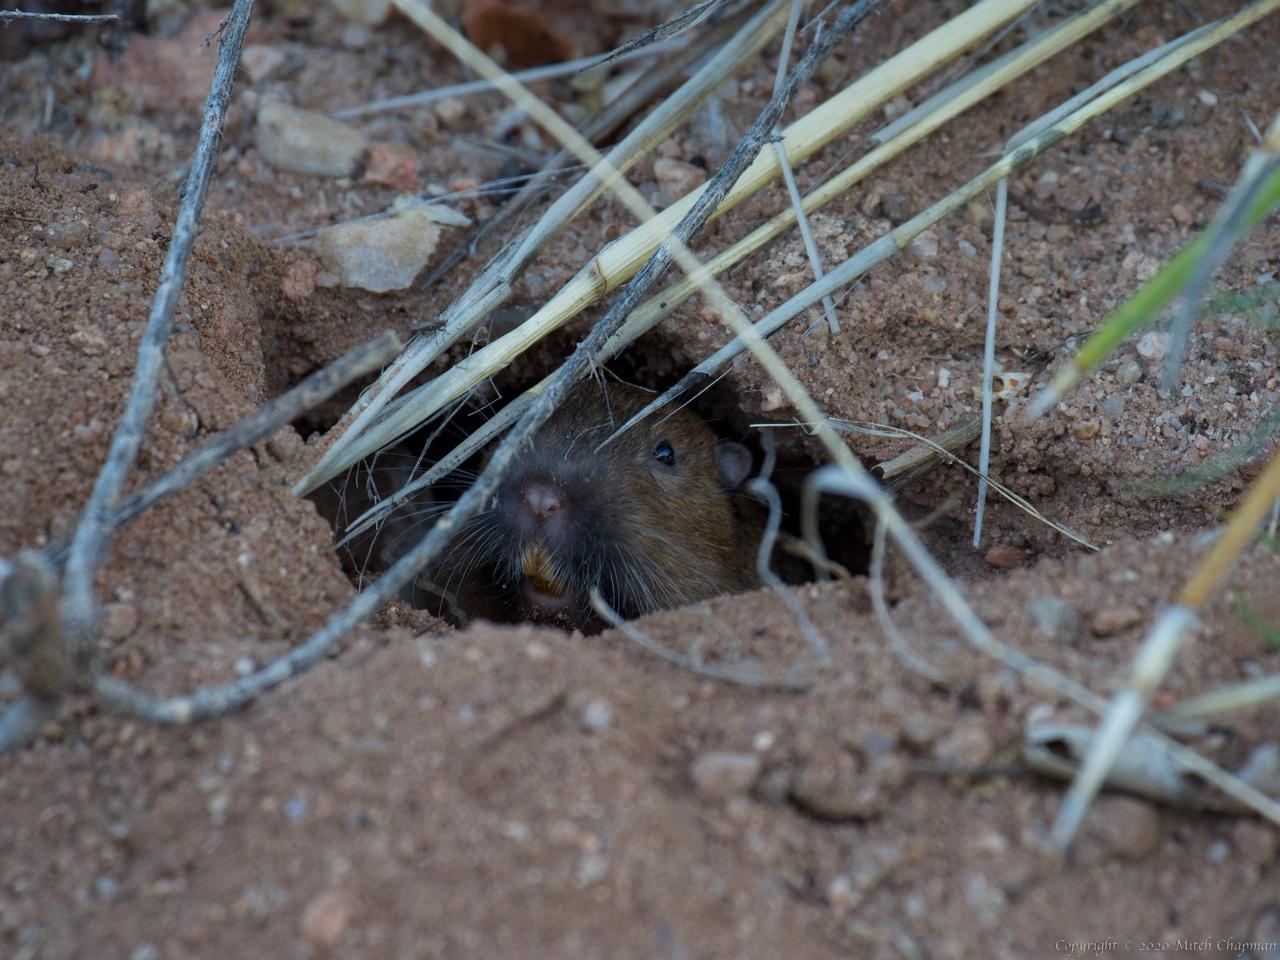 Botta's Pocket Gopher – with its poor eyesight, I don't think it saw me